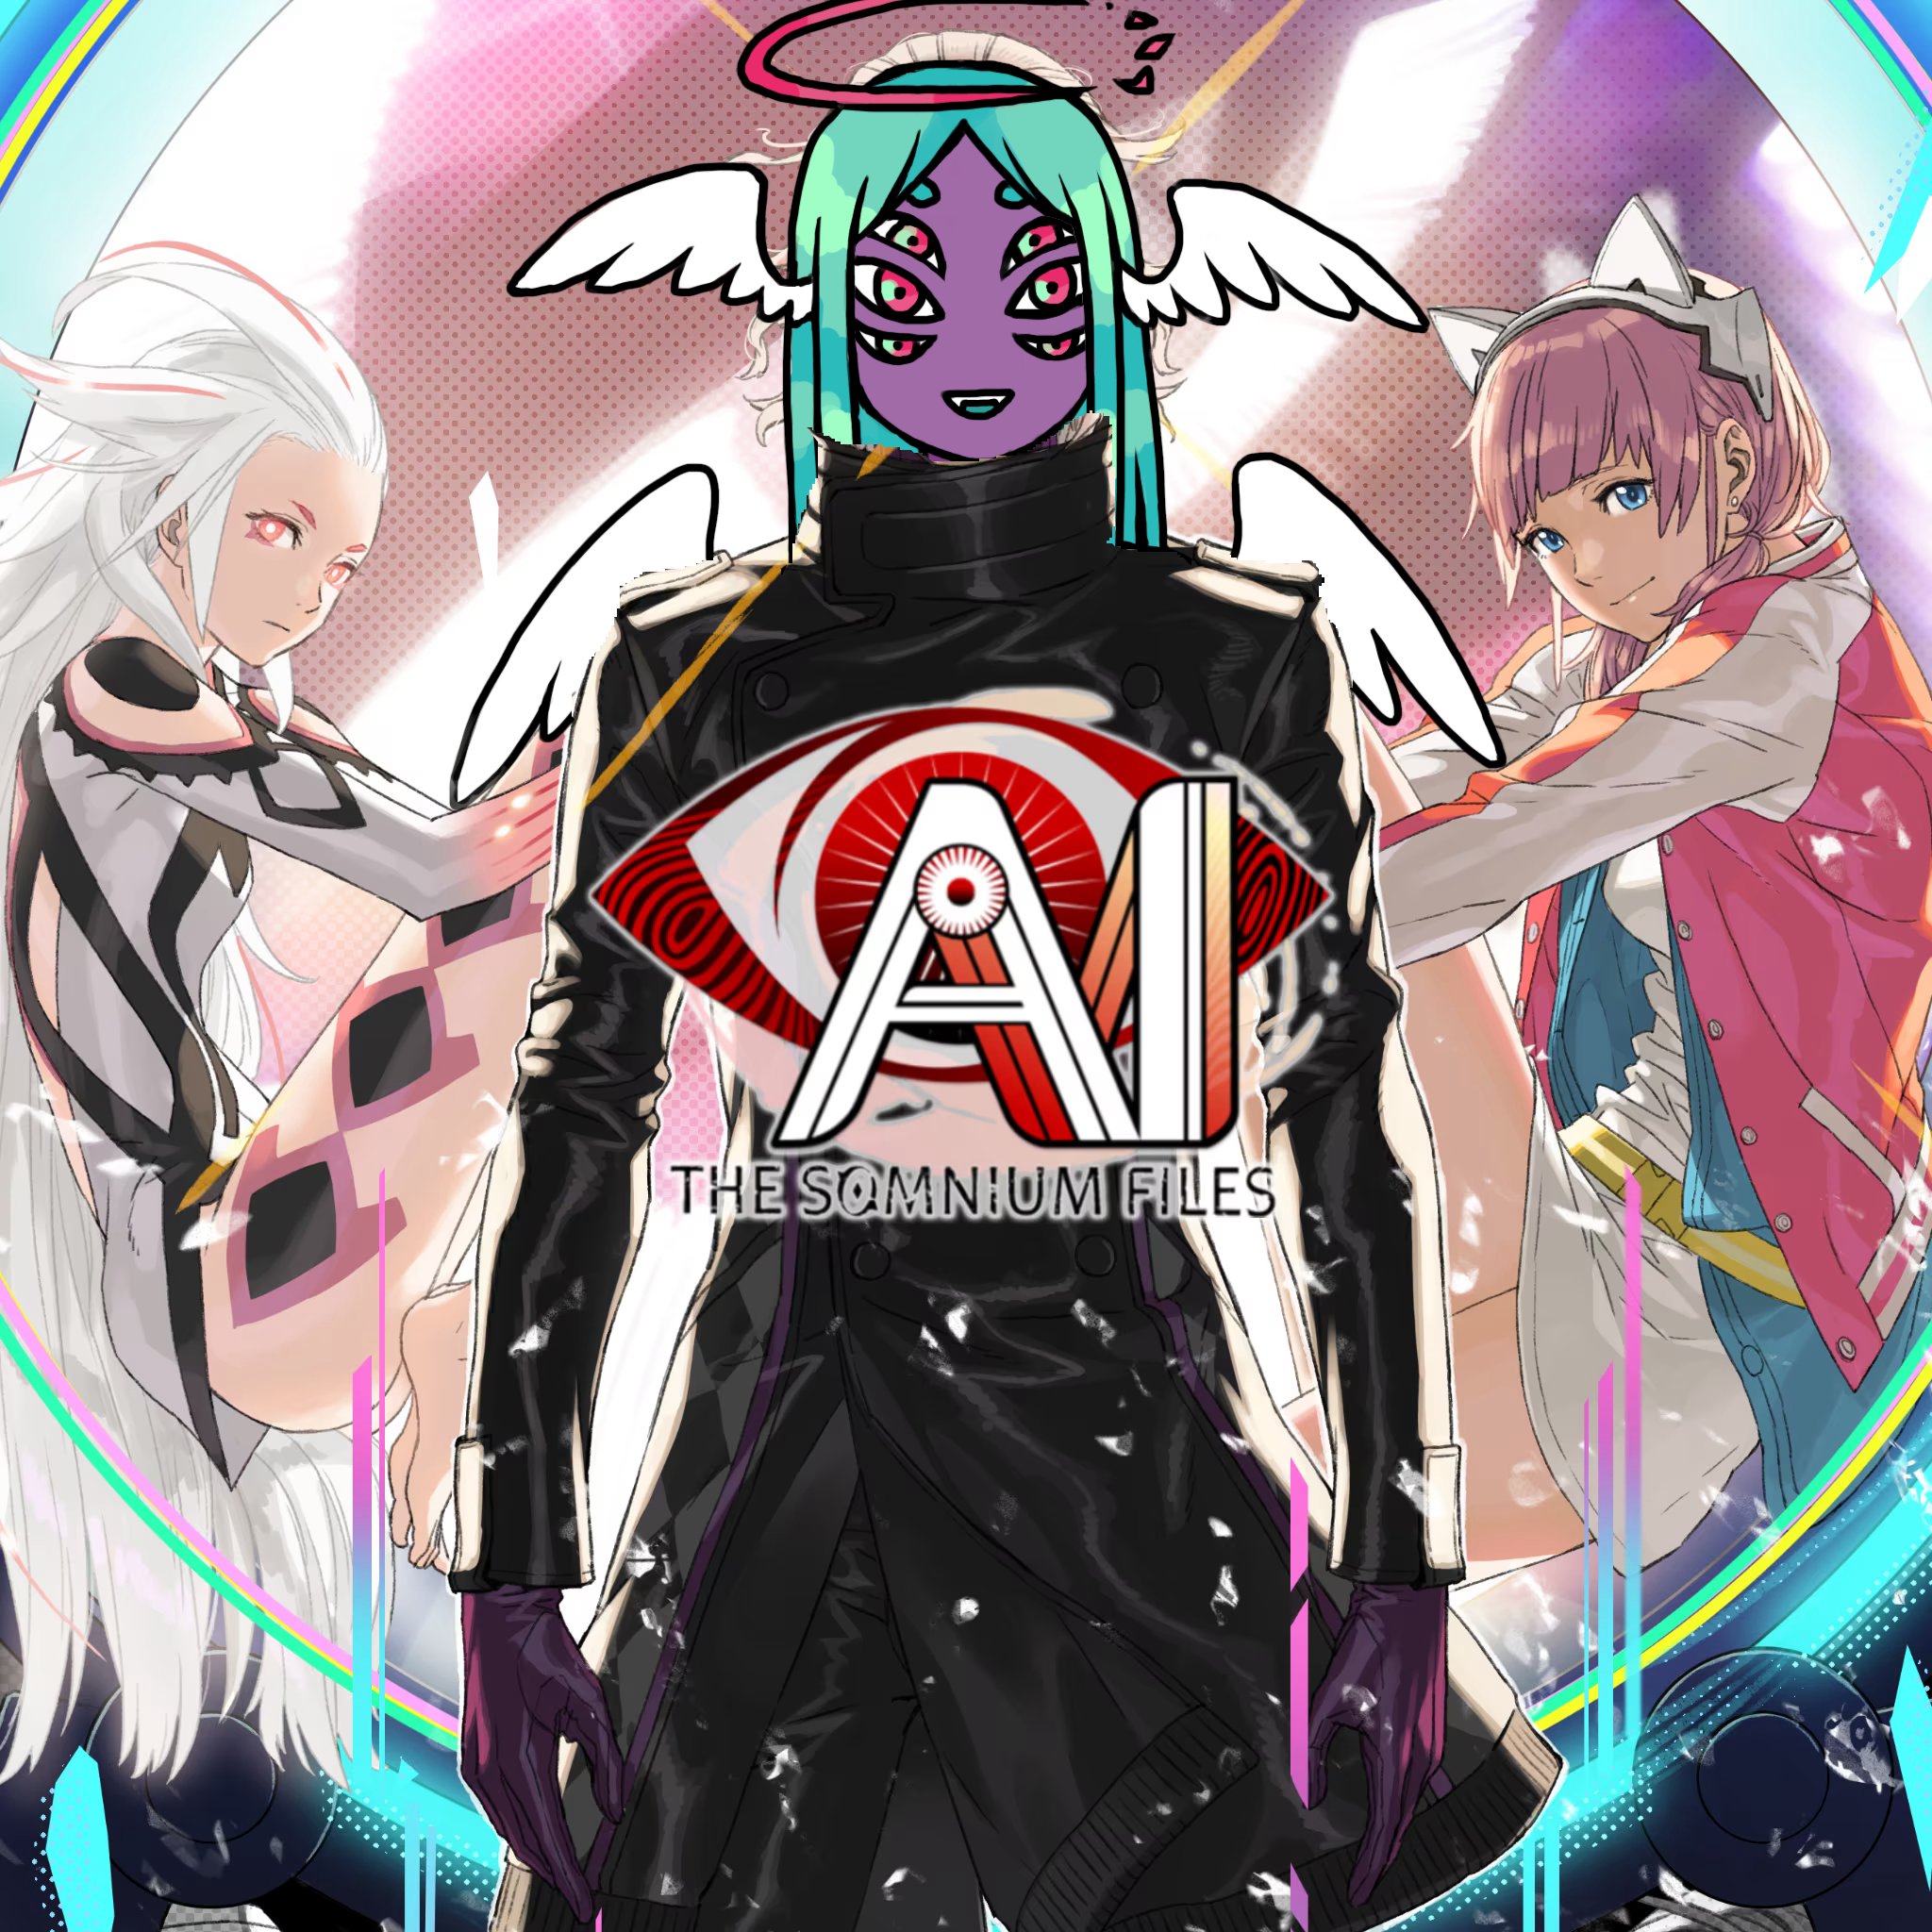 A promotional image for AI: The Somnium Files with Ianthe's face
                                                and wings edited on to Date